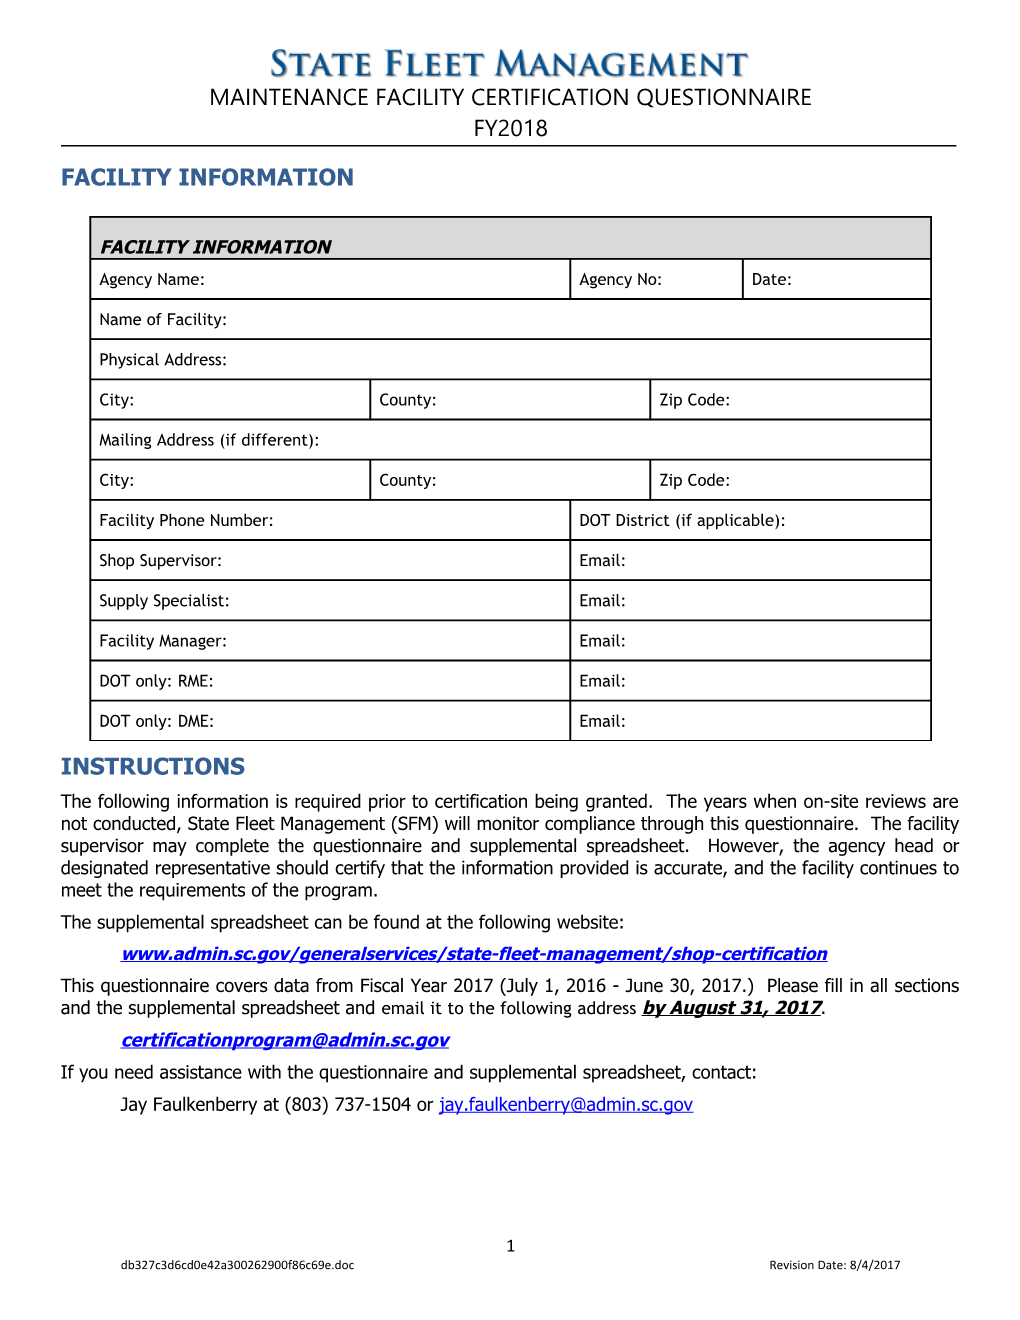 Maintenance Facility Certificationquestionnaire